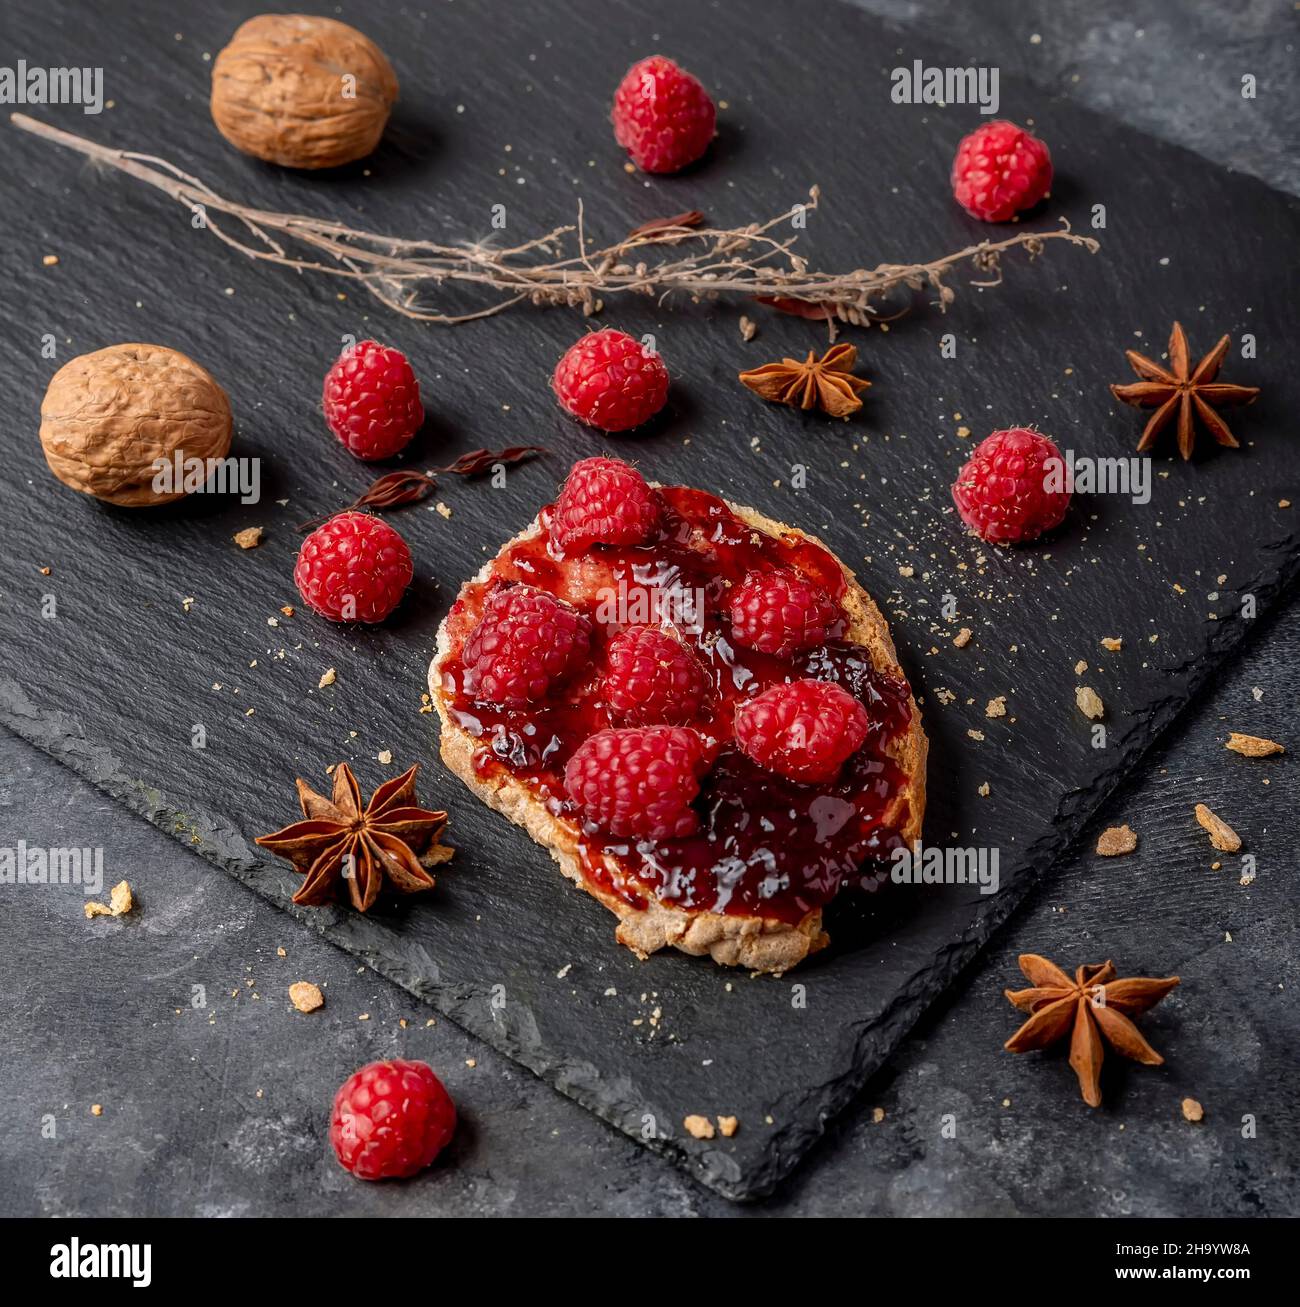 A delicious crouton with jam and whole raspberries on top and some walnuts near it, on a black slate background Stock Photo